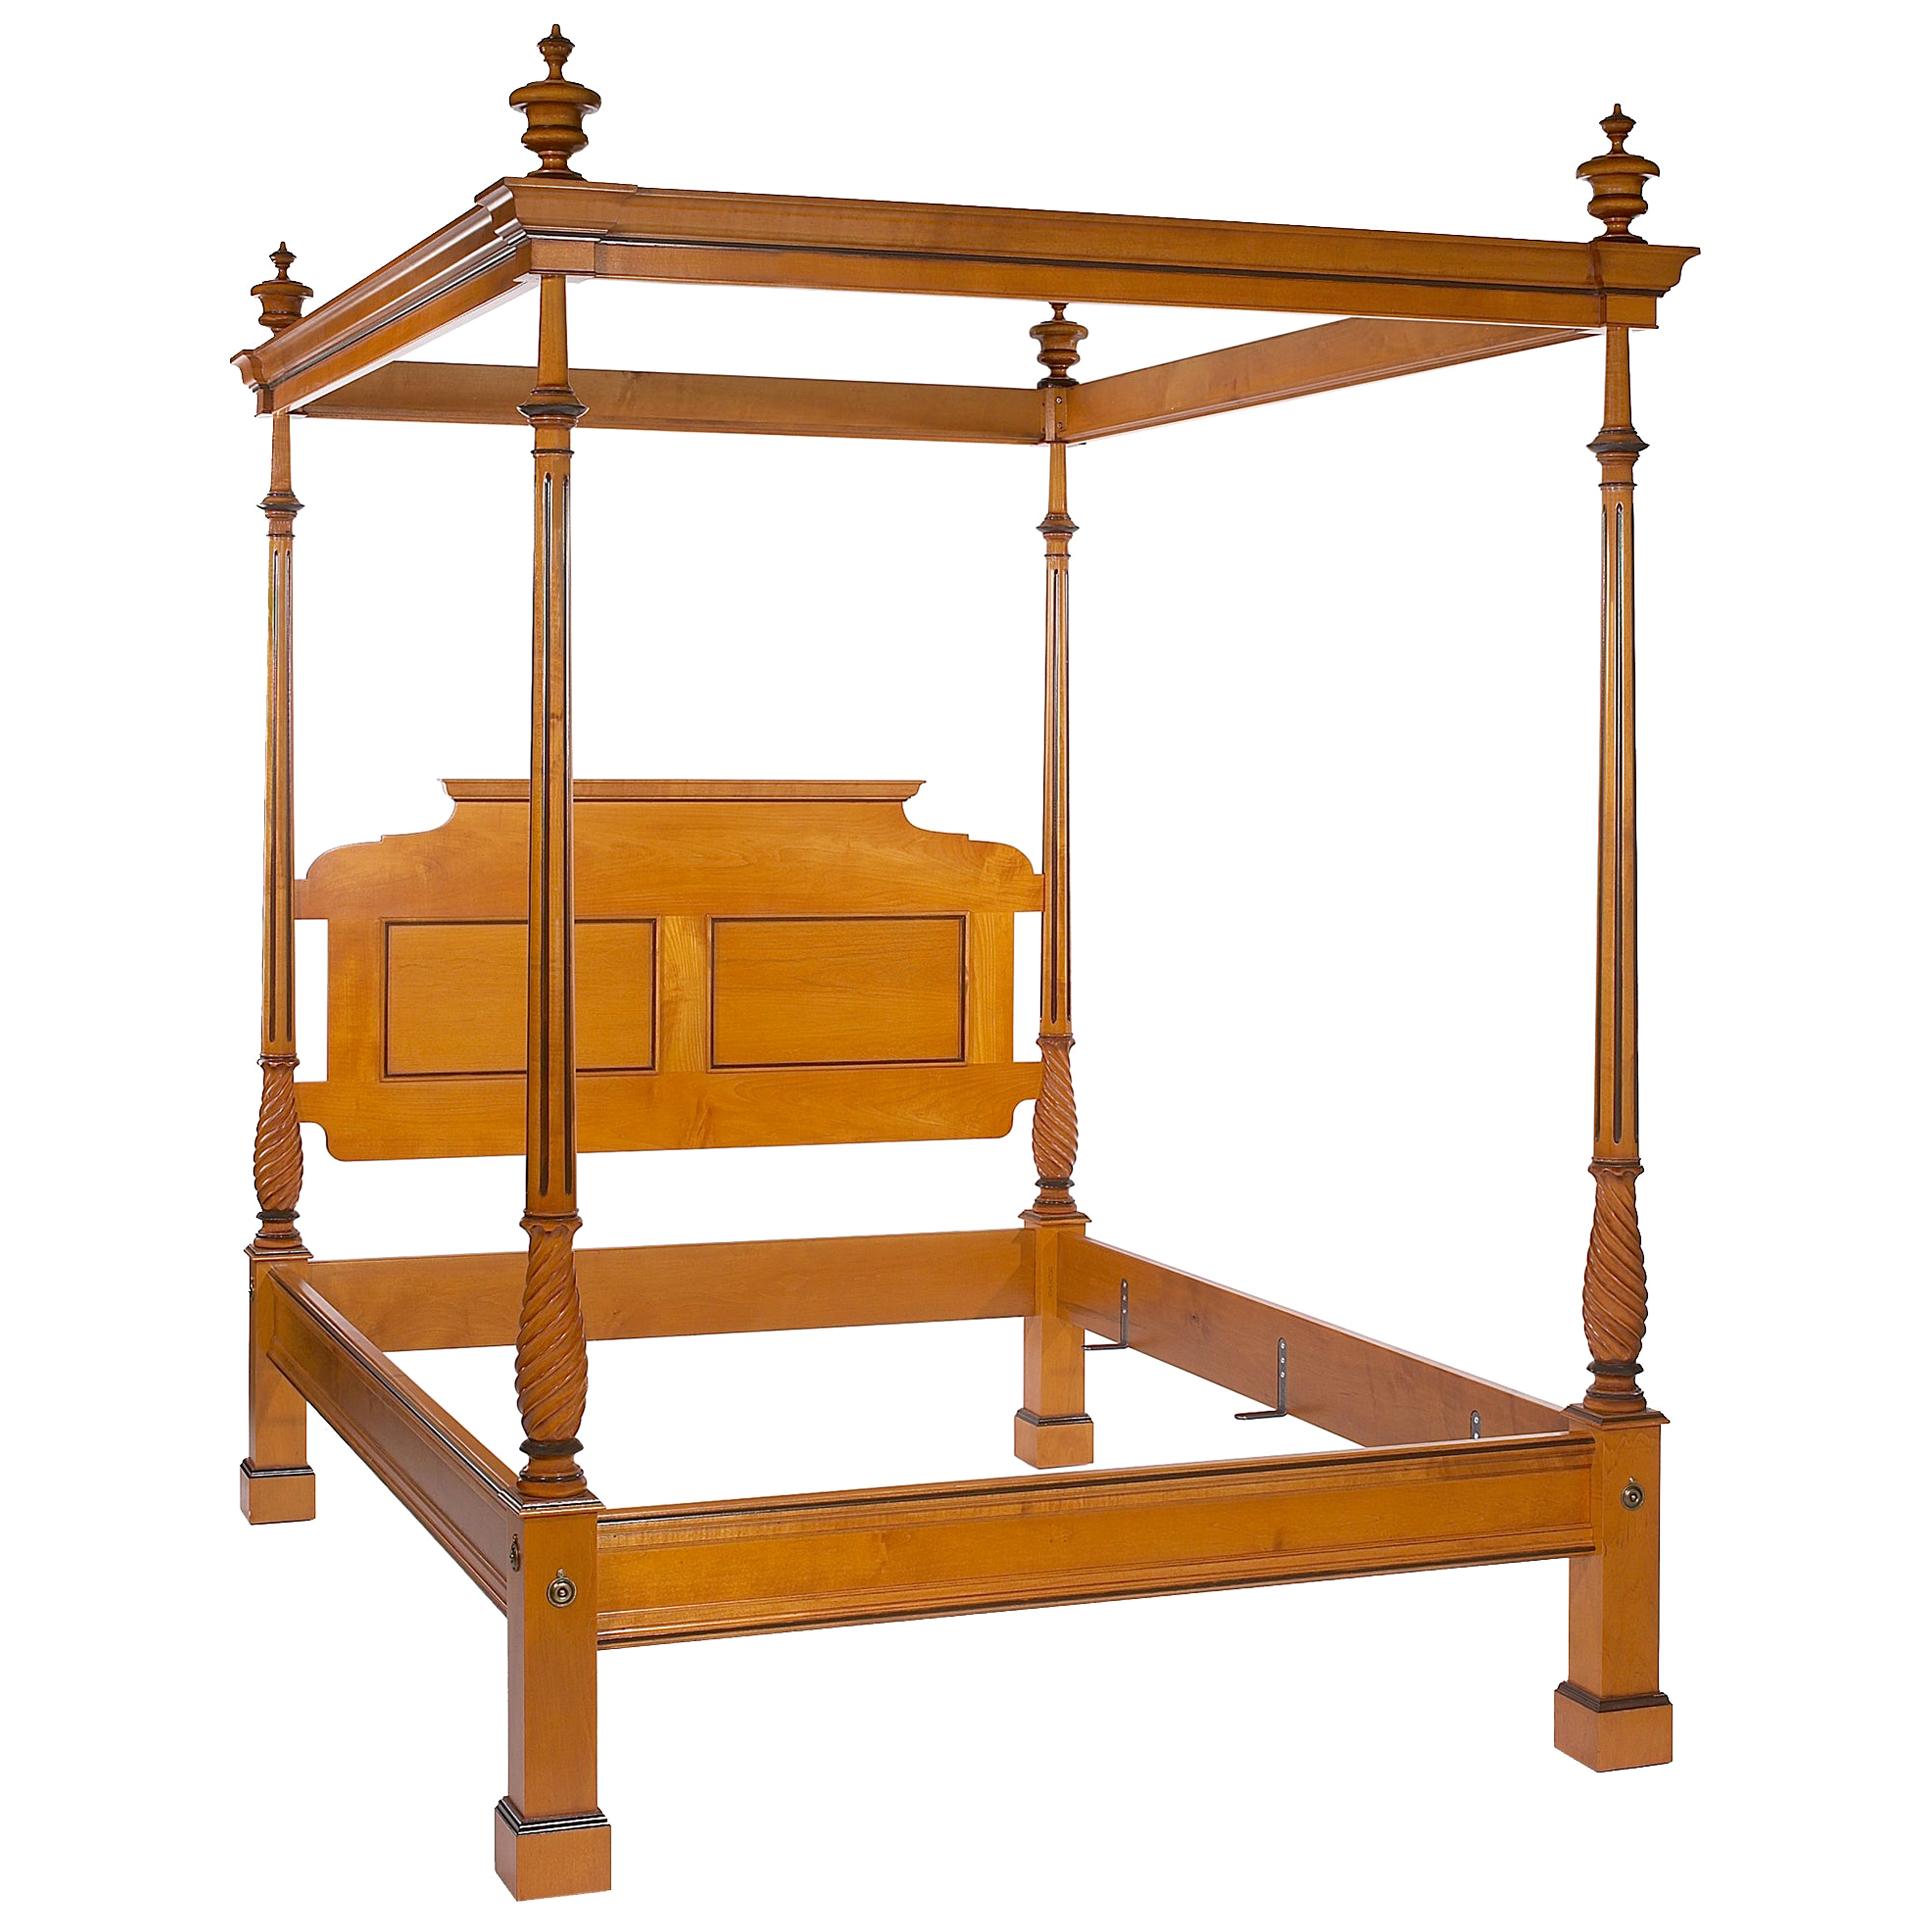 Four Post Byron Canopy Bed with Carved and Fluted Posts by Scott James Furniture